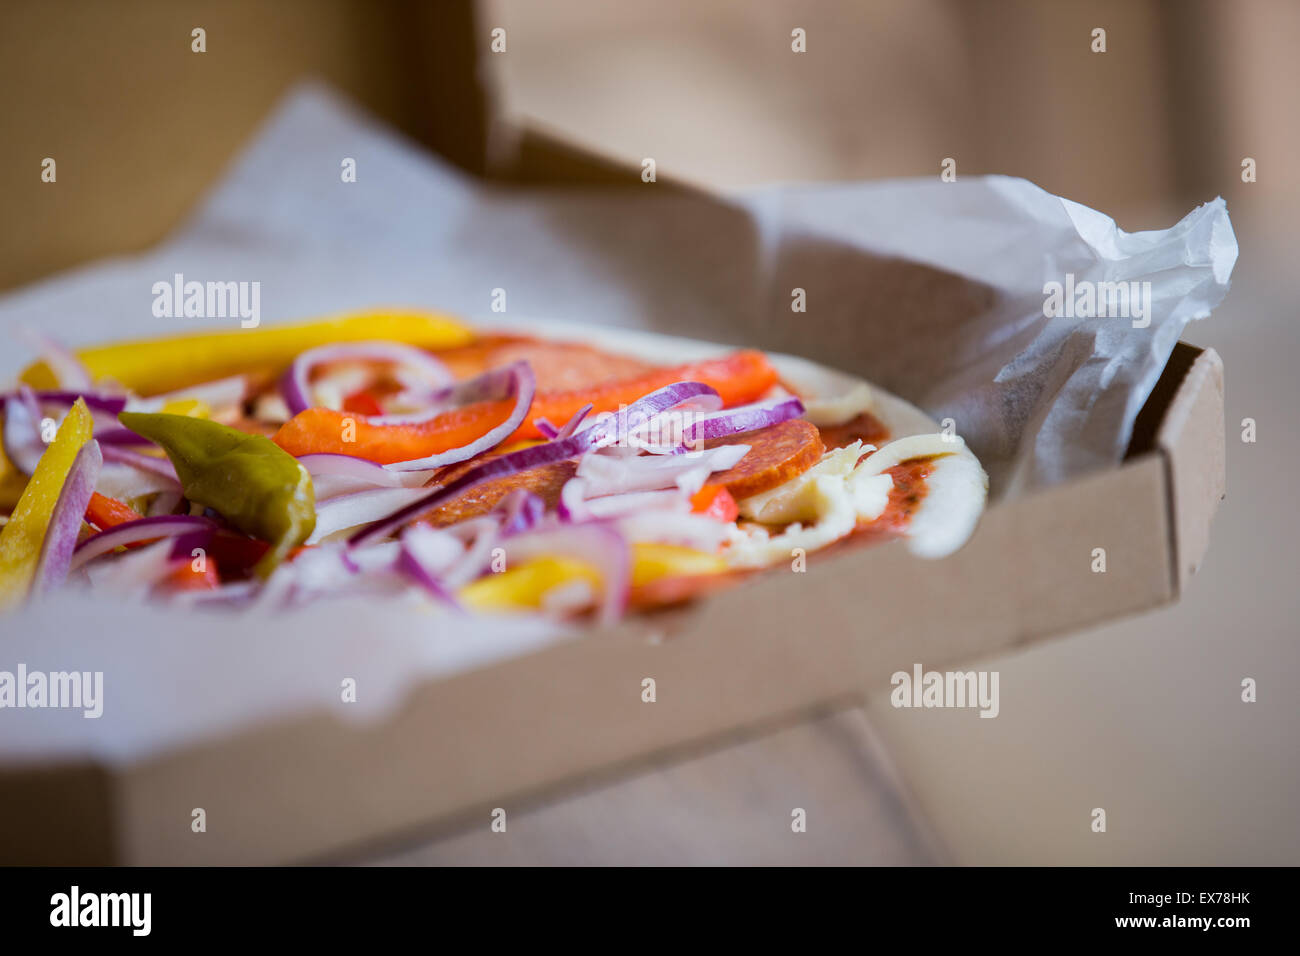 Bonn, Germany. 7th July, 2015. A raw pizza is put into the oven at the Vapiano headquaters in Bonn, Germany, 7 July 2015. The restaurant chain hopes in the future to deliver 'Homebaked Pizza' - pizza that the customer bakes in the oven themselves. Photo: Rolf Vennenbernd/dpa/Alamy Live News Stock Photo